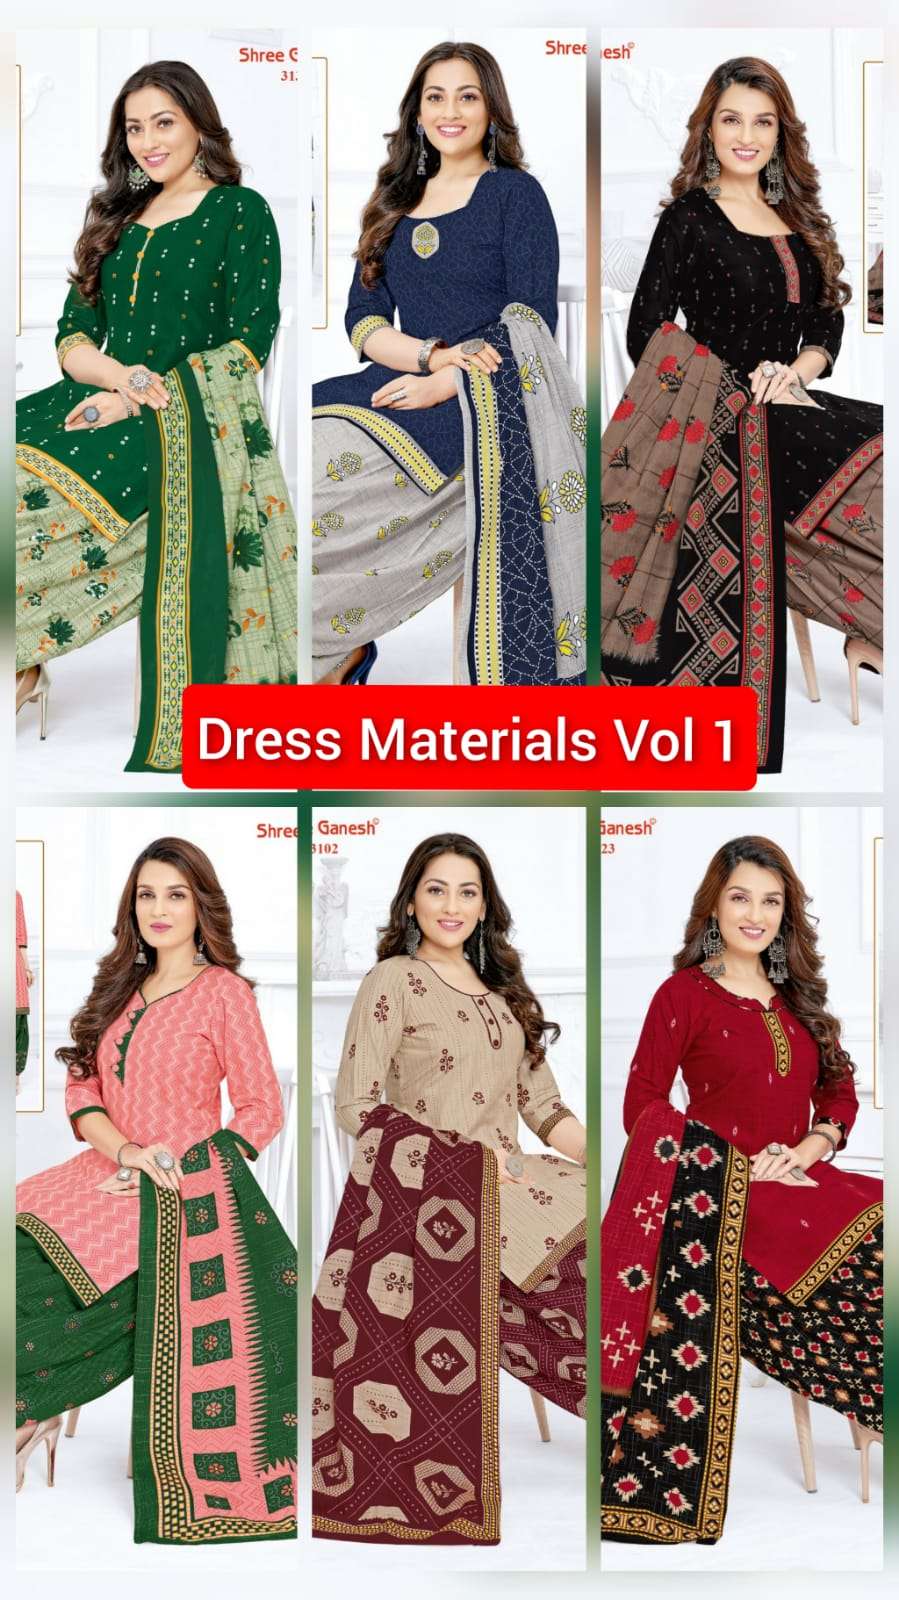 DRESS MATERIAL BY SHREE GANESH BEAUTIFUL STYLISH SUITS FANCY COLORFUL CASUAL WEAR & ETHNIC WEAR & READY TO WEAR COTTON PRINTED DRESSES AT WHOLESALE PRICE